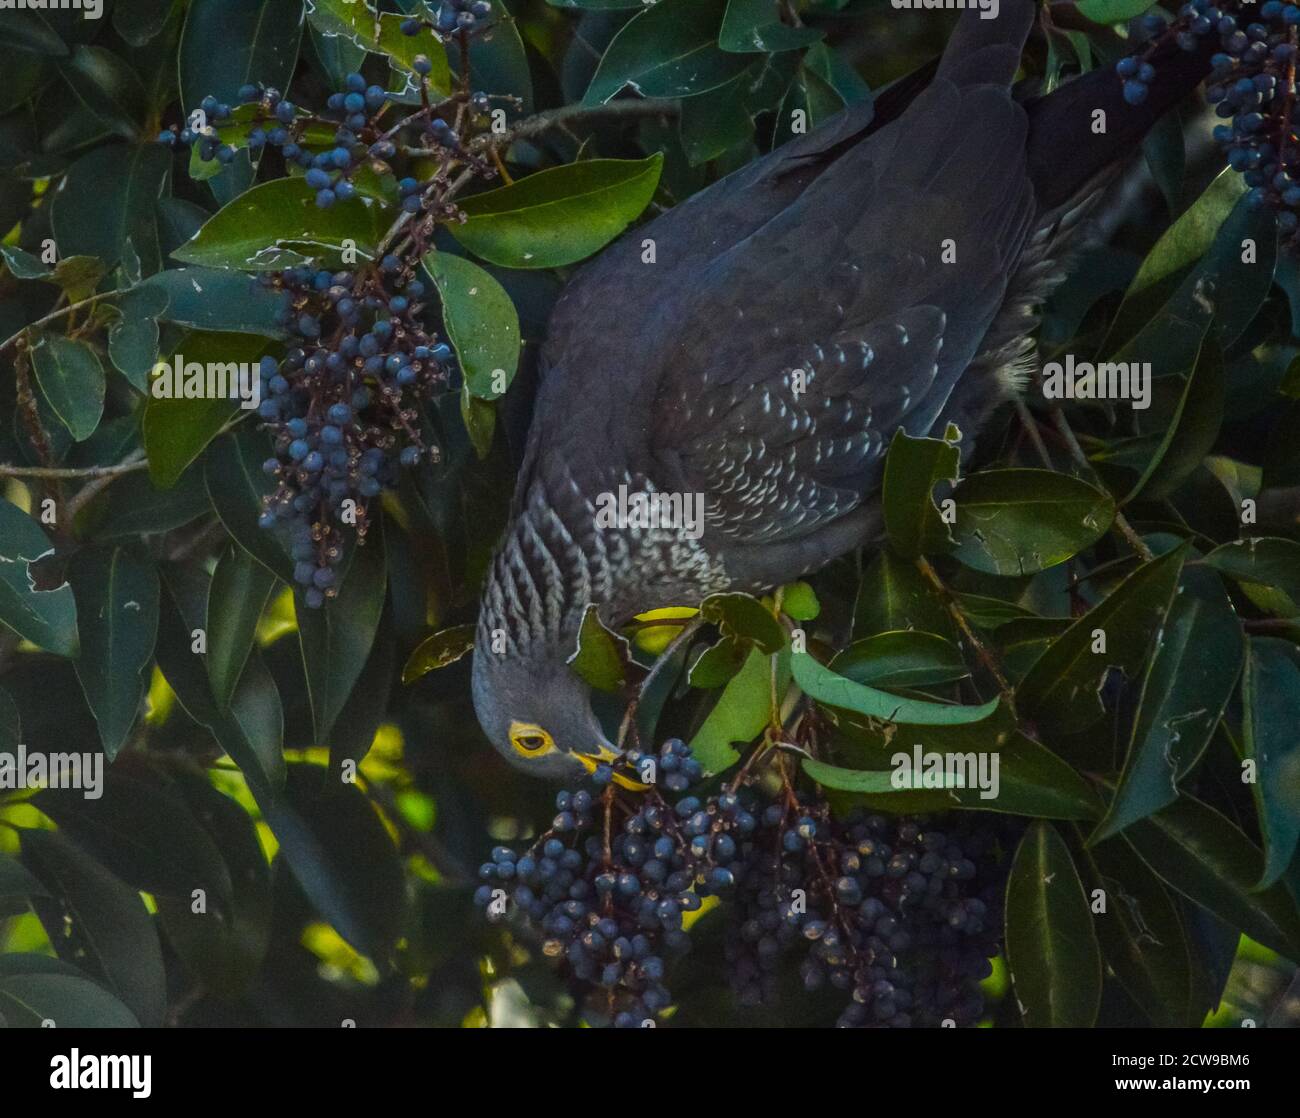 Colorful Rameron or olive pigeon perched on an elderberry tree and feeding Stock Photo